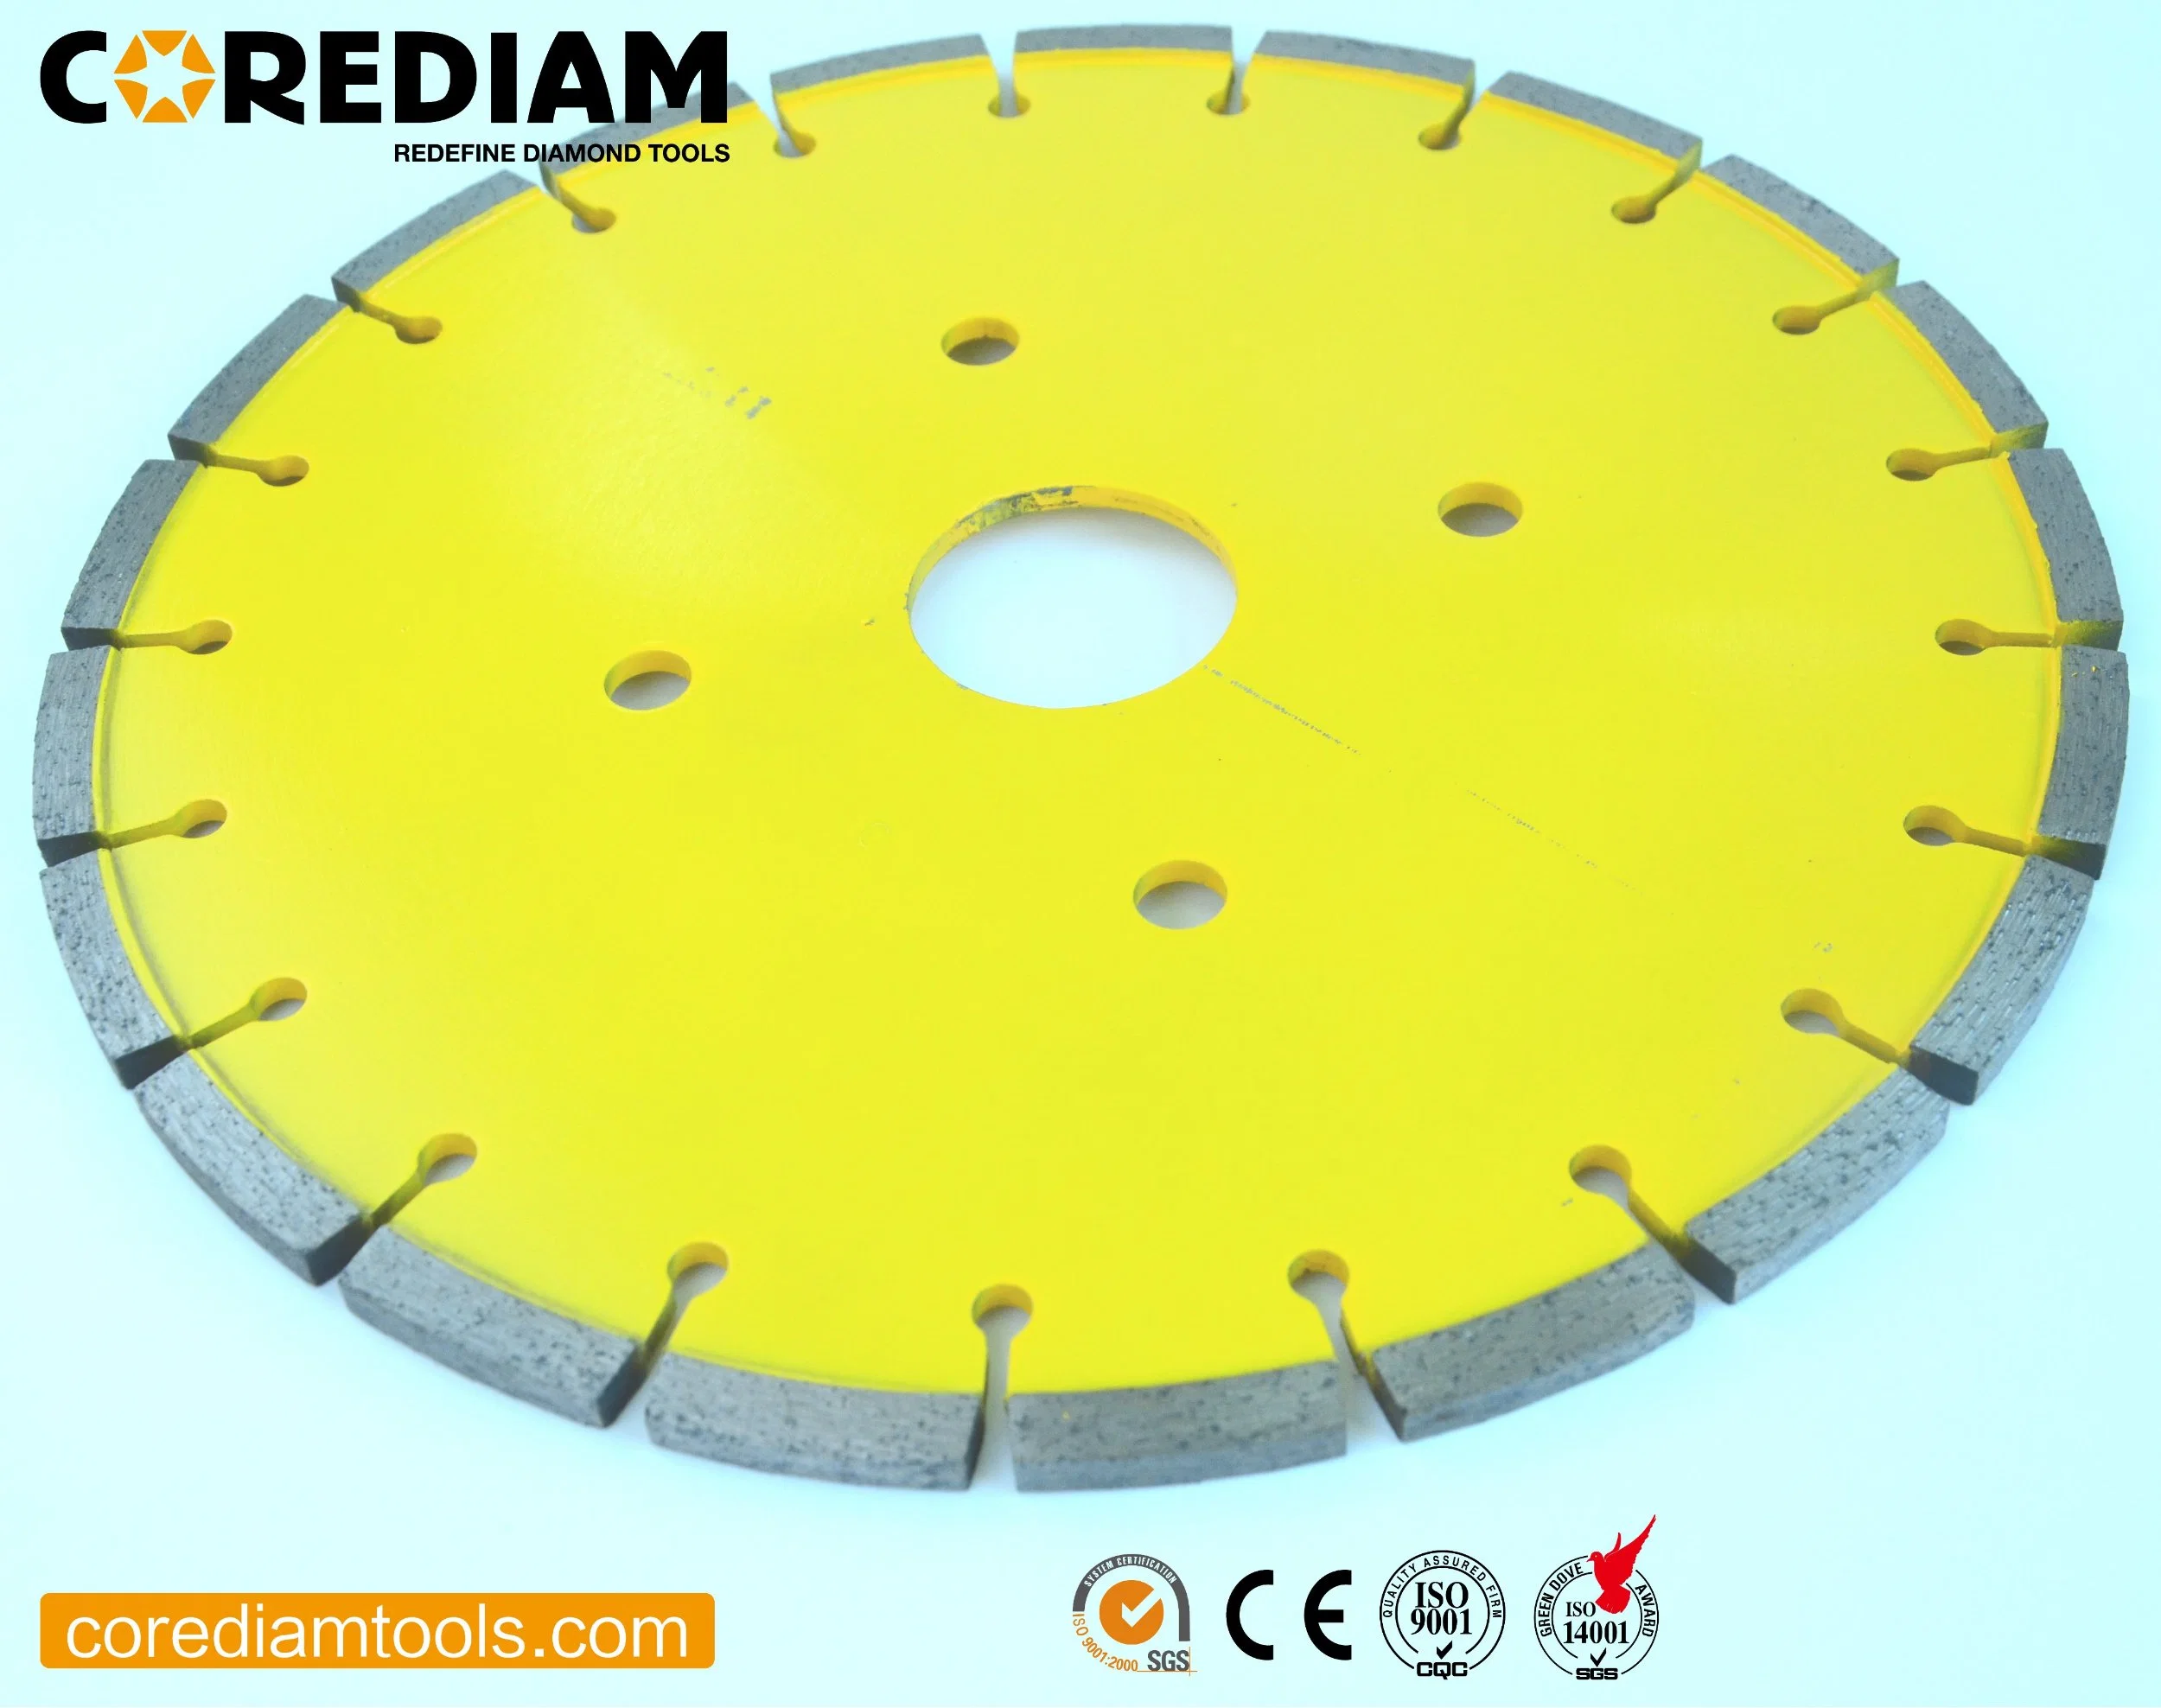 Super Quality 350 mm/16 Inch Laser Welded Diamond Tuck Point Saw Blade in 6.4mm Segment Thickness/Diamond Tool